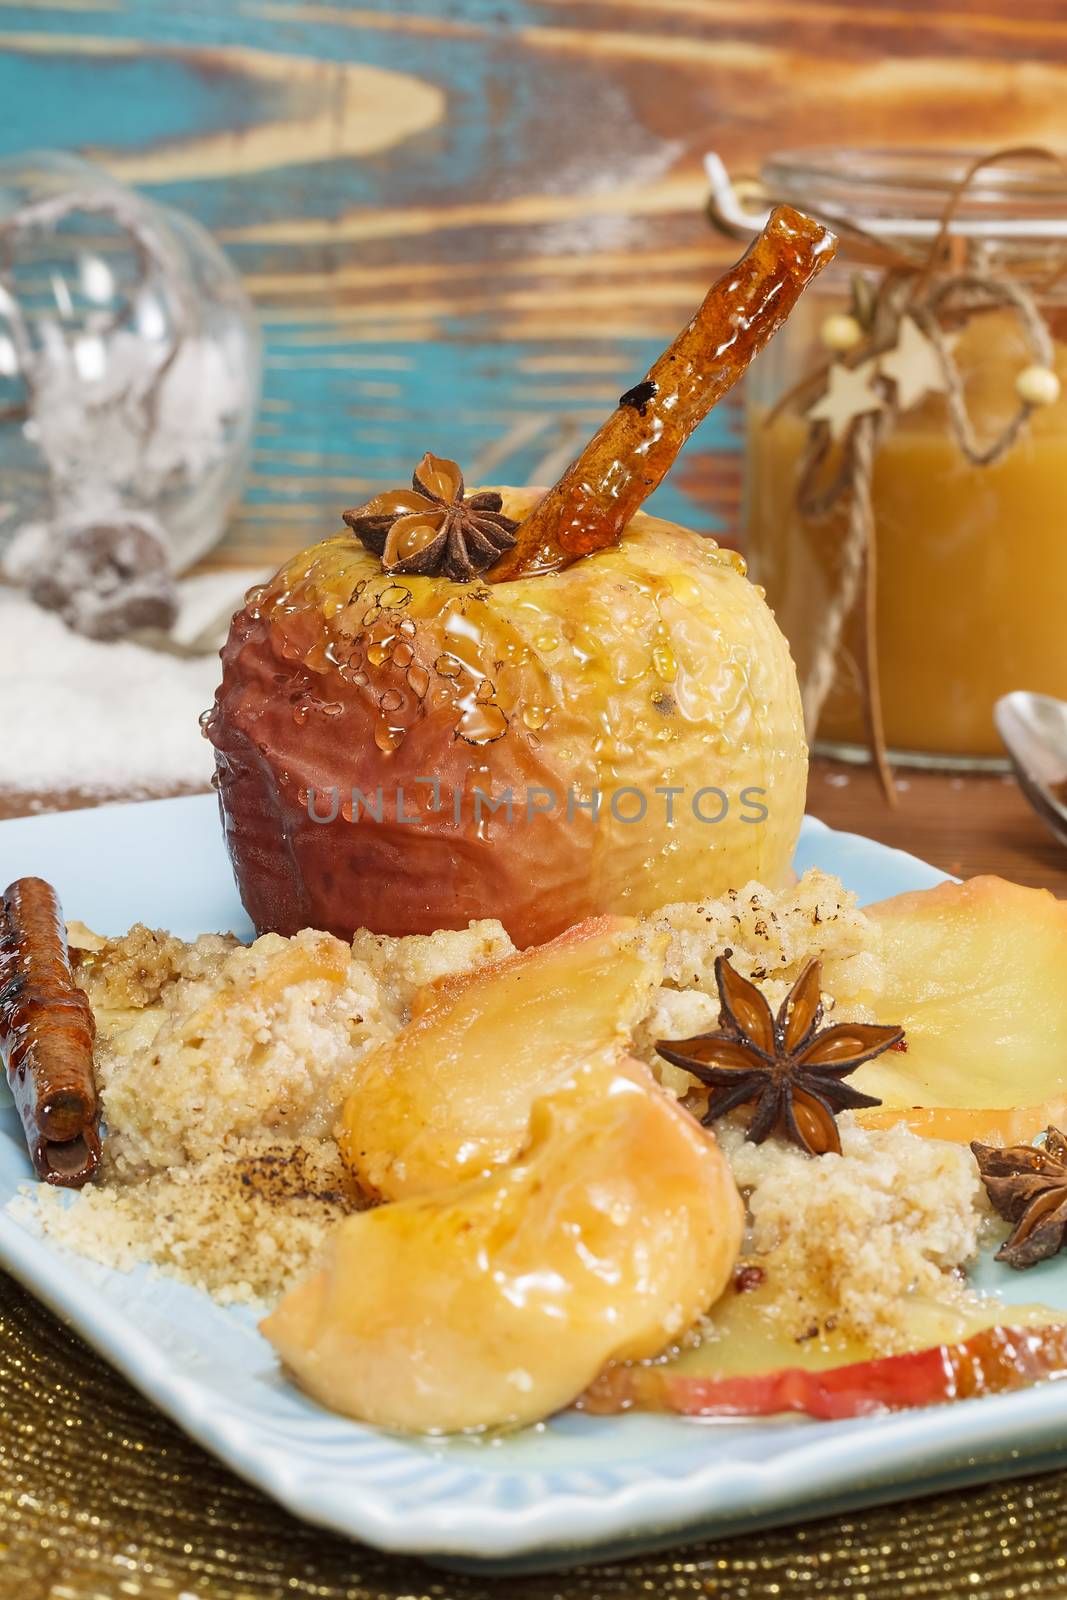 Baked apples in rustic setting served for Christmas by Slast20